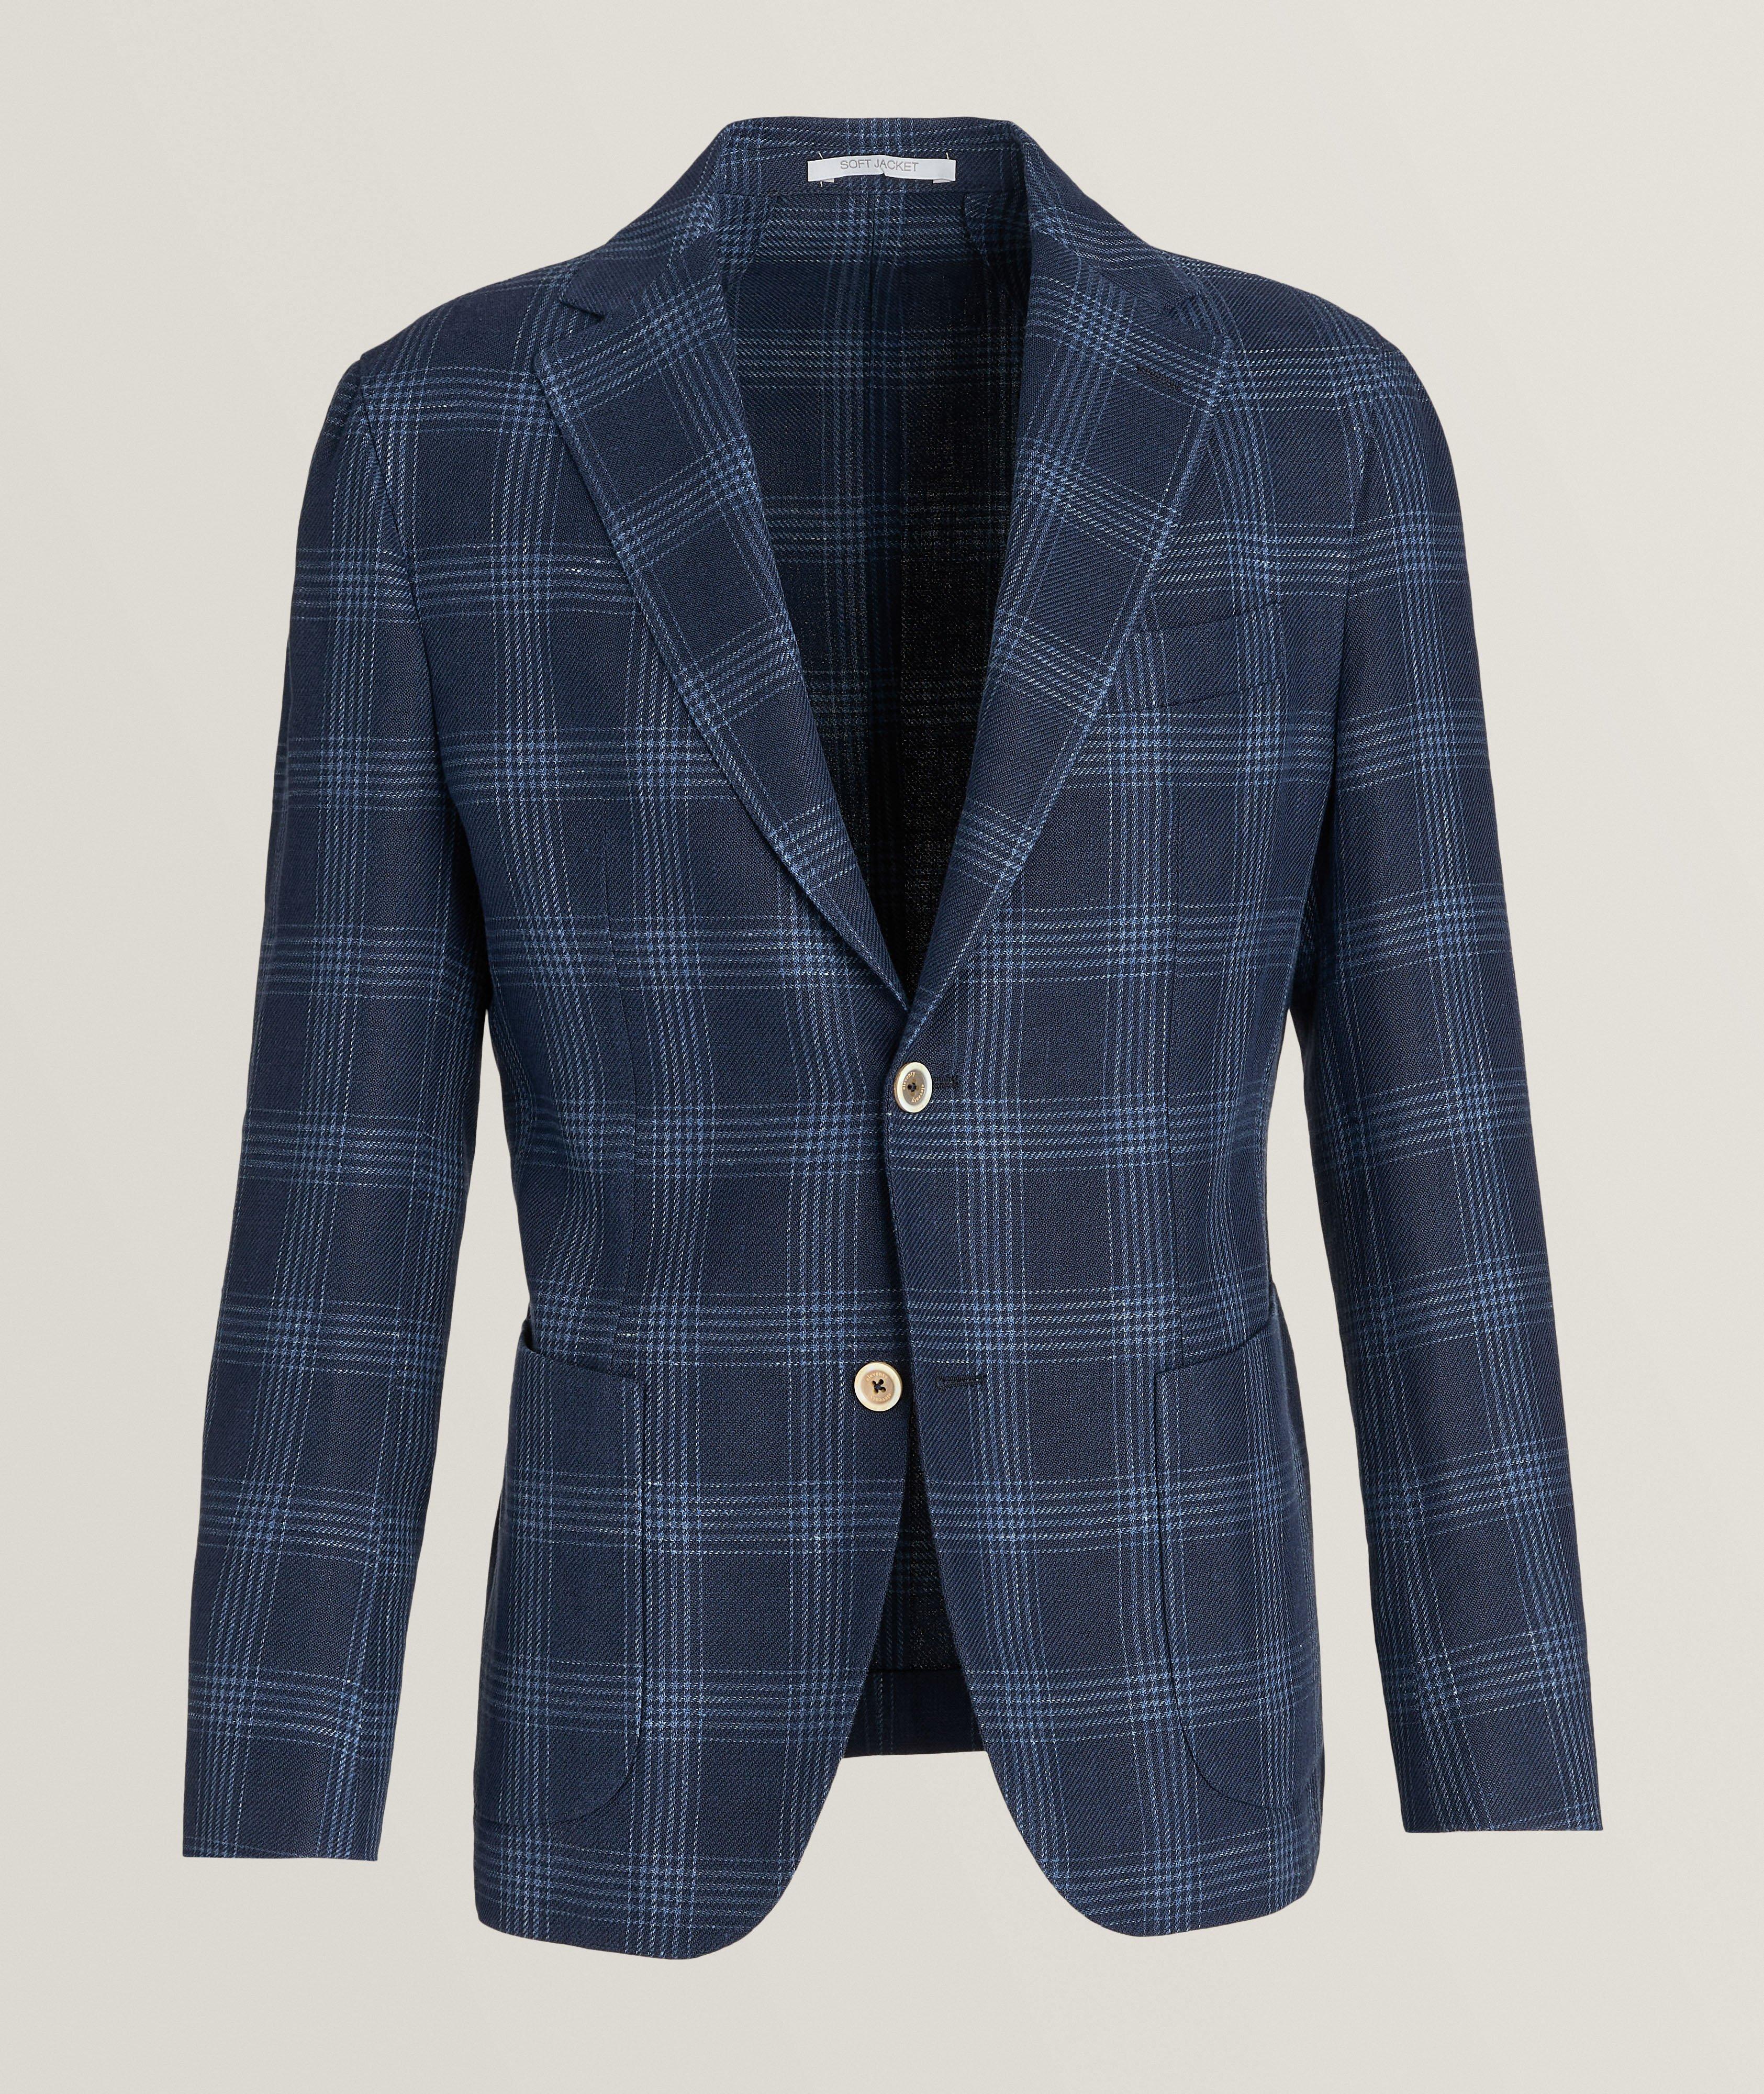 Platinum Collection Checked Linen-Wool Sport Jacket image 0